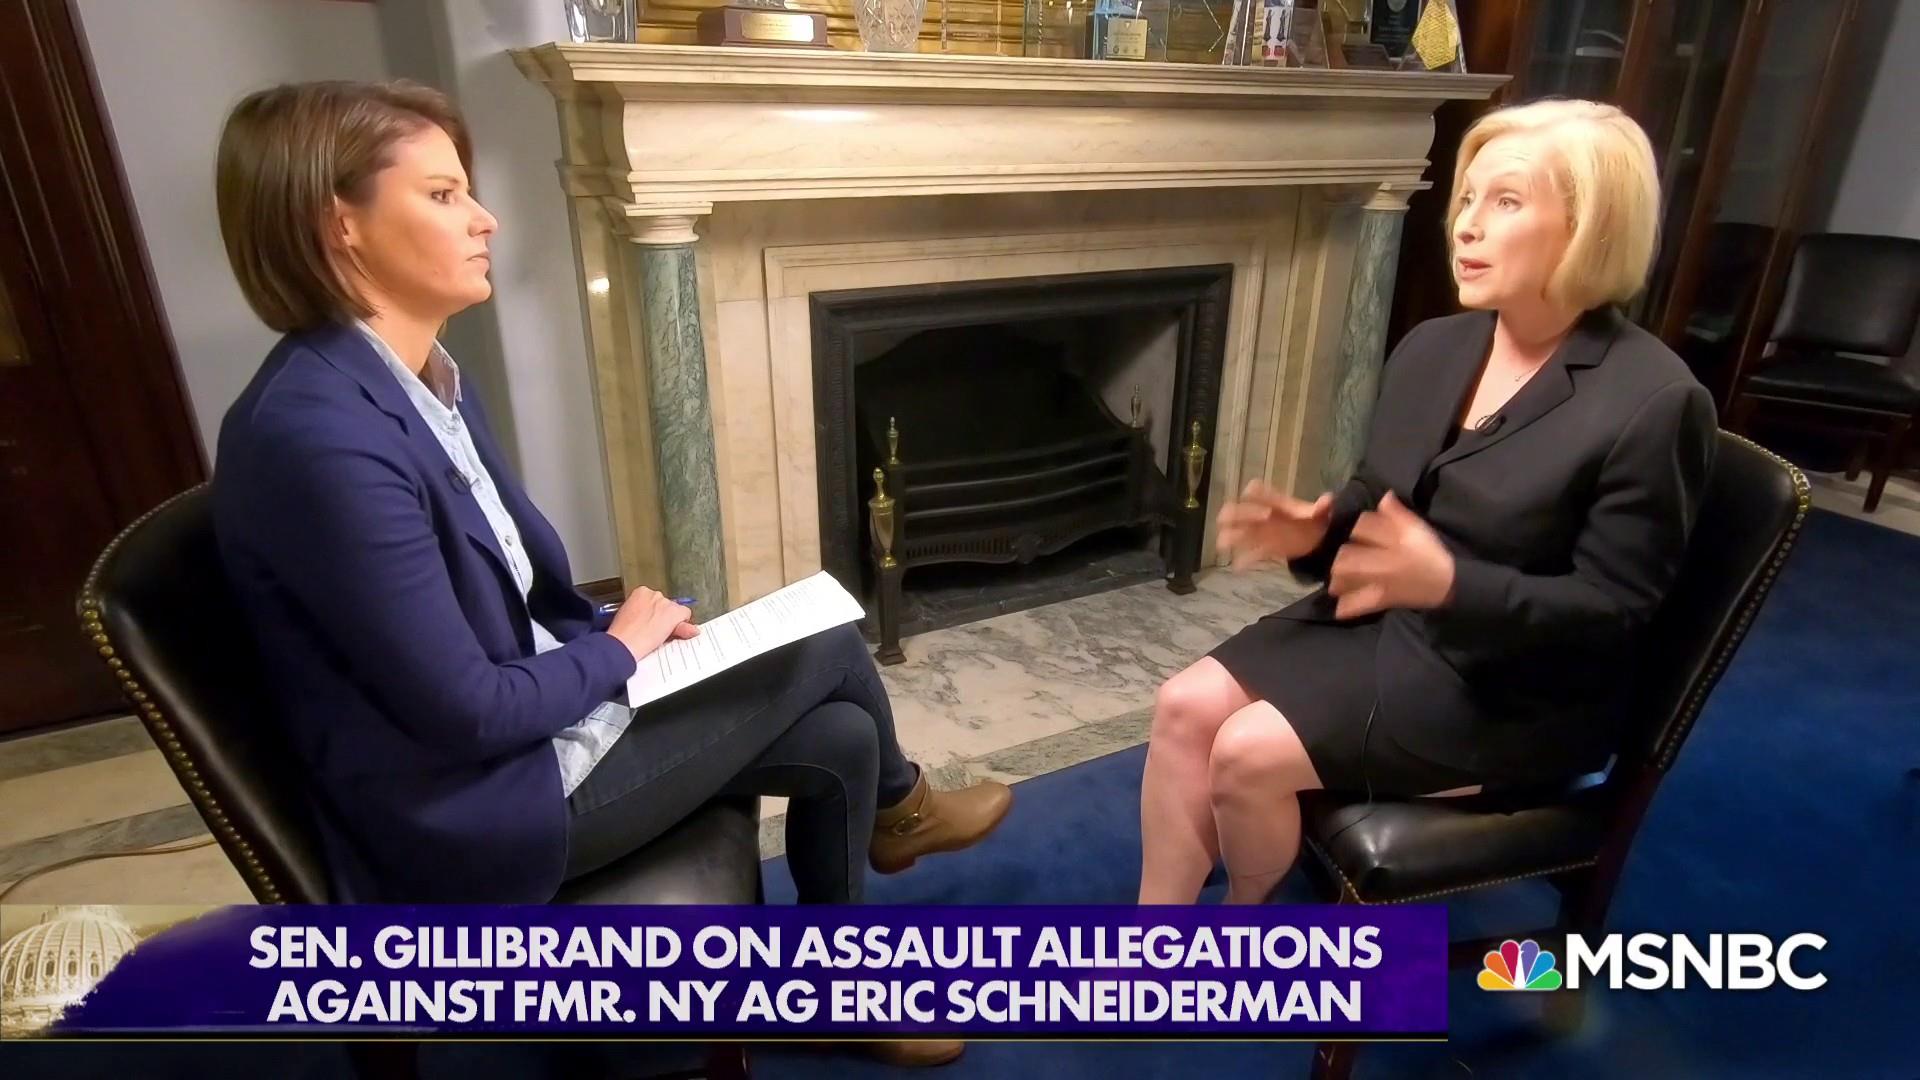 Gillibrand: New sexual harassment bill to Senate floor “as early as next week”